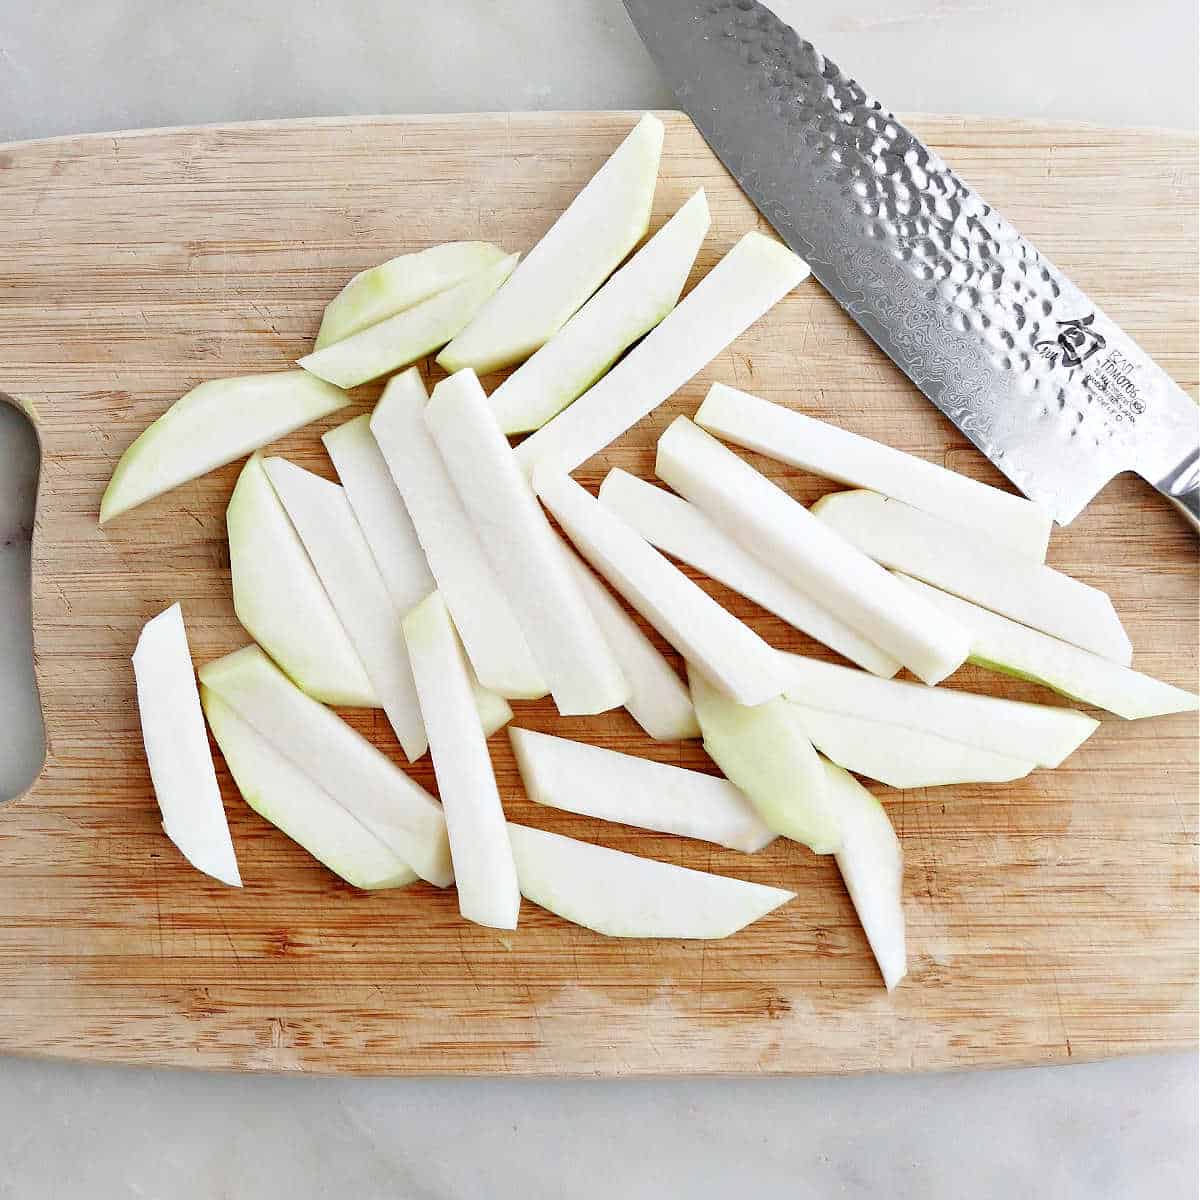 kohlrabi sliced into spears on a cutting board with a chef's knife